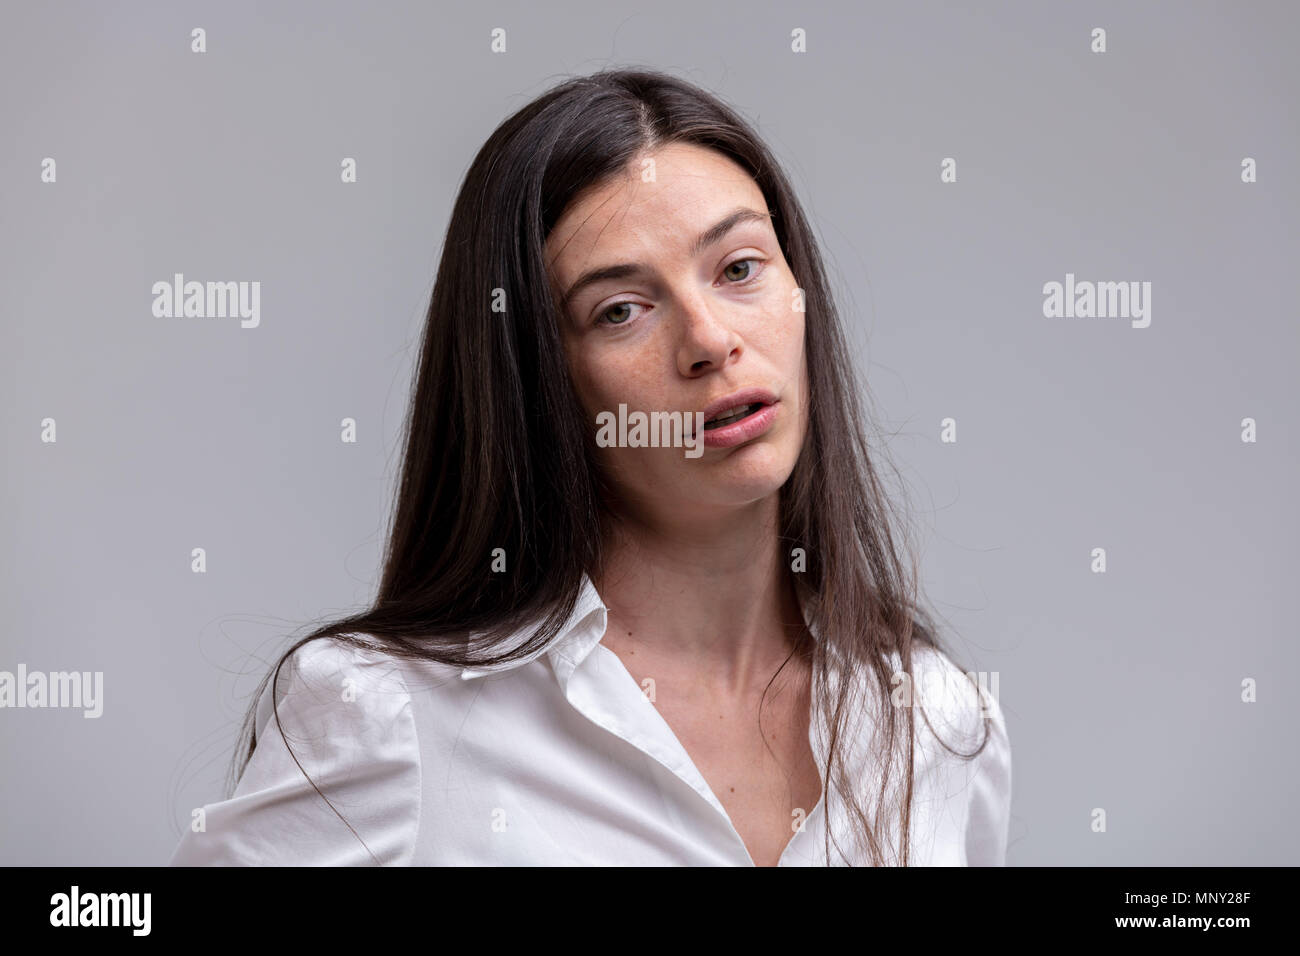 Sympathetic genuine young woman speaking to the camera with titled head and look of empathy over a grey background Stock Photo